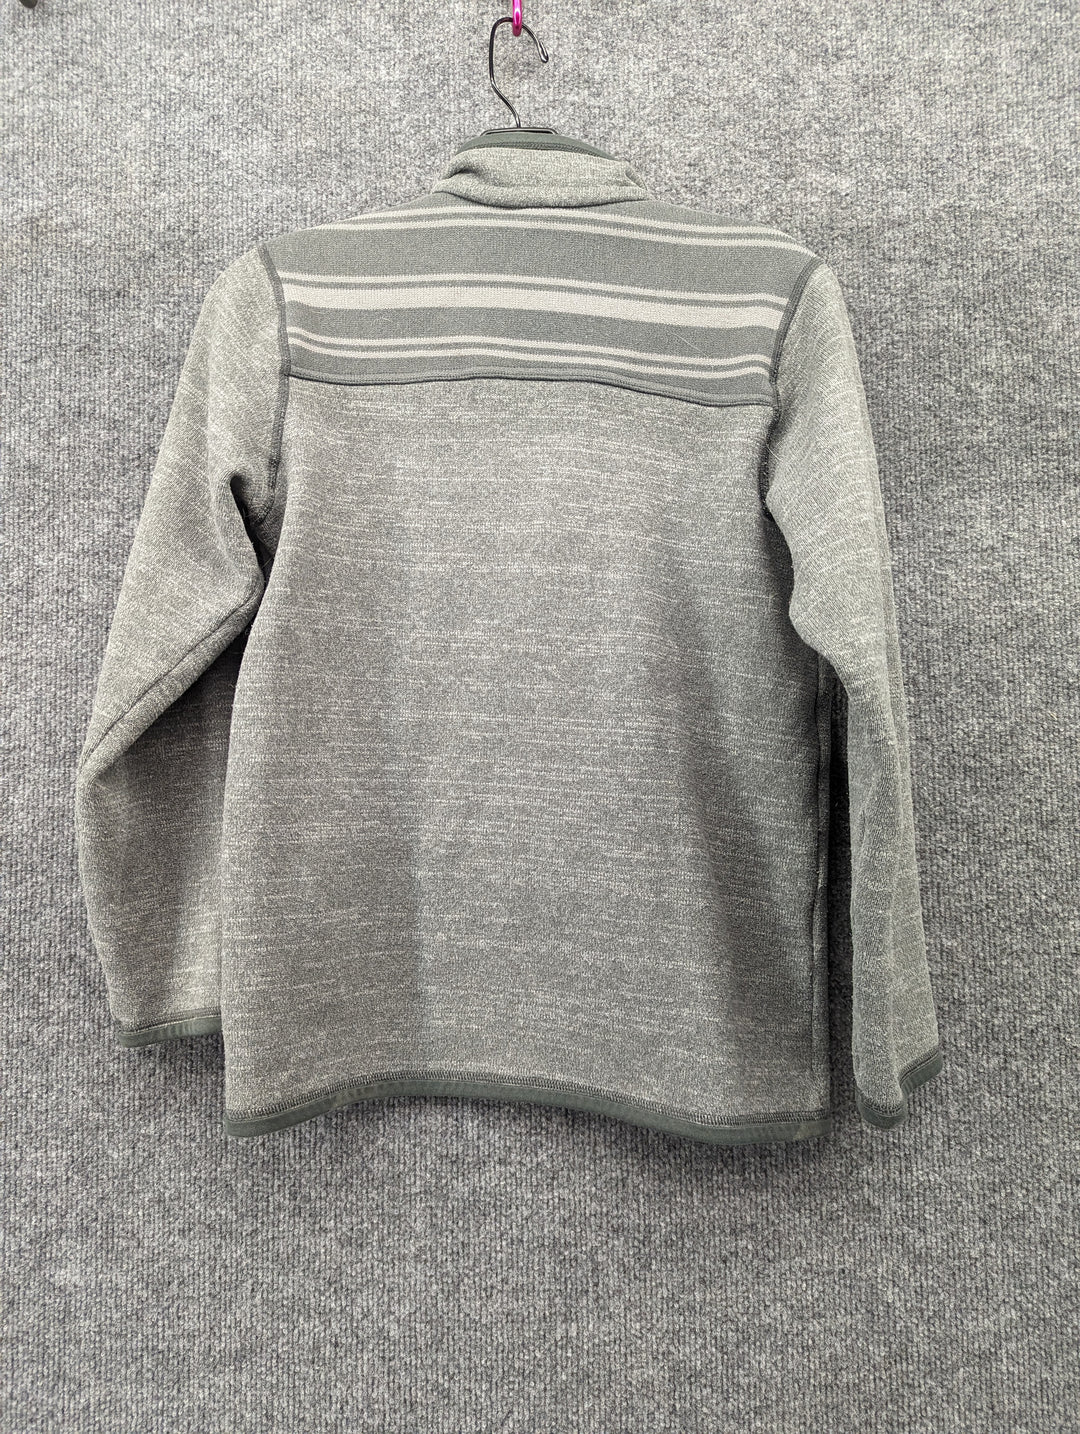 Size Y Large Youth Sweater